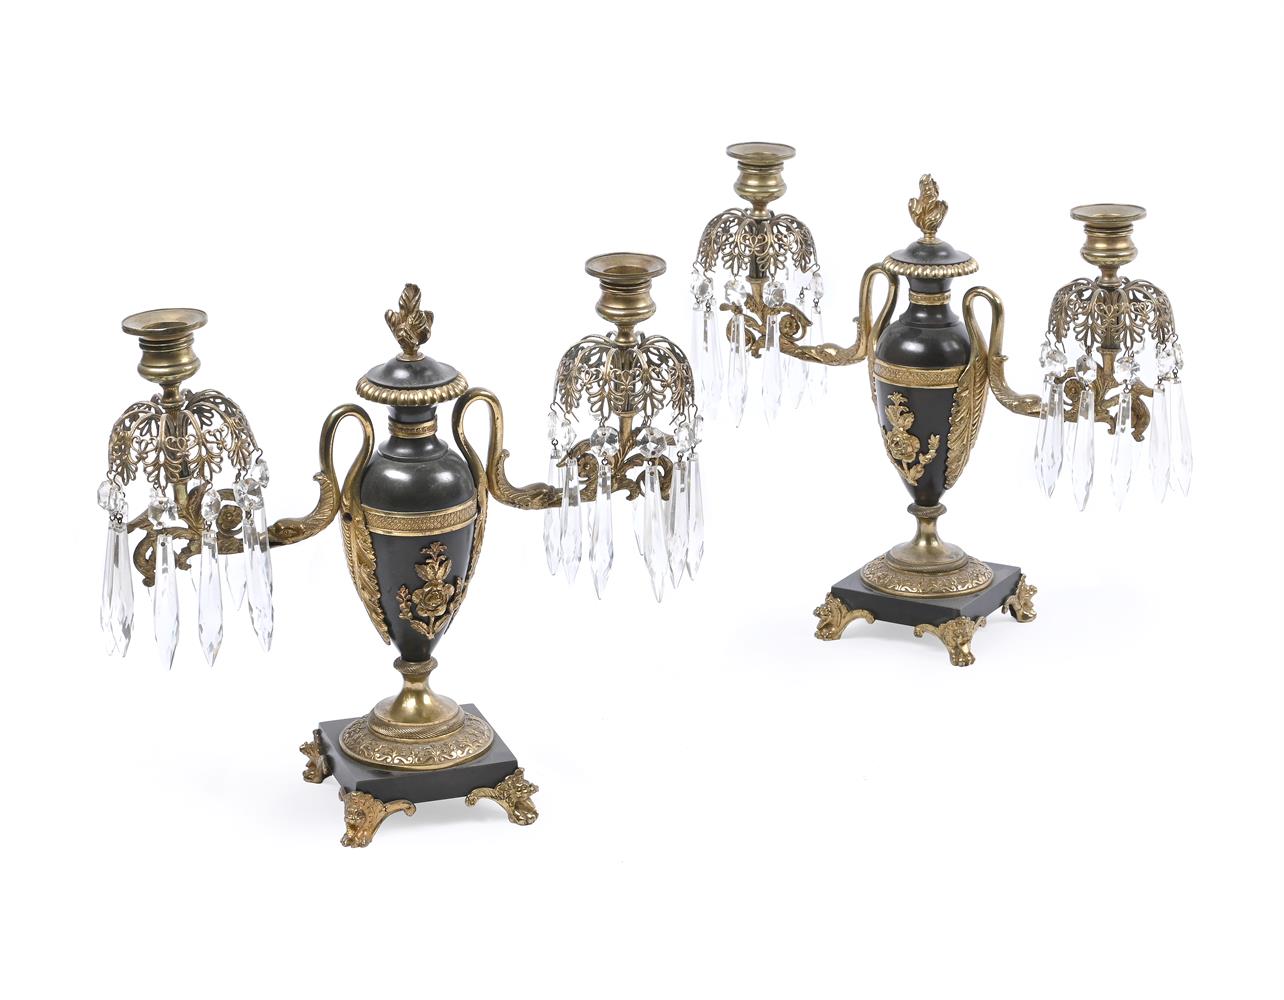 A PAIR OF REGENCY PATINATED AND GILT BRONZE TWIN LIGHT CANDELABRA, EARLY 19TH CENTURY - Image 2 of 3